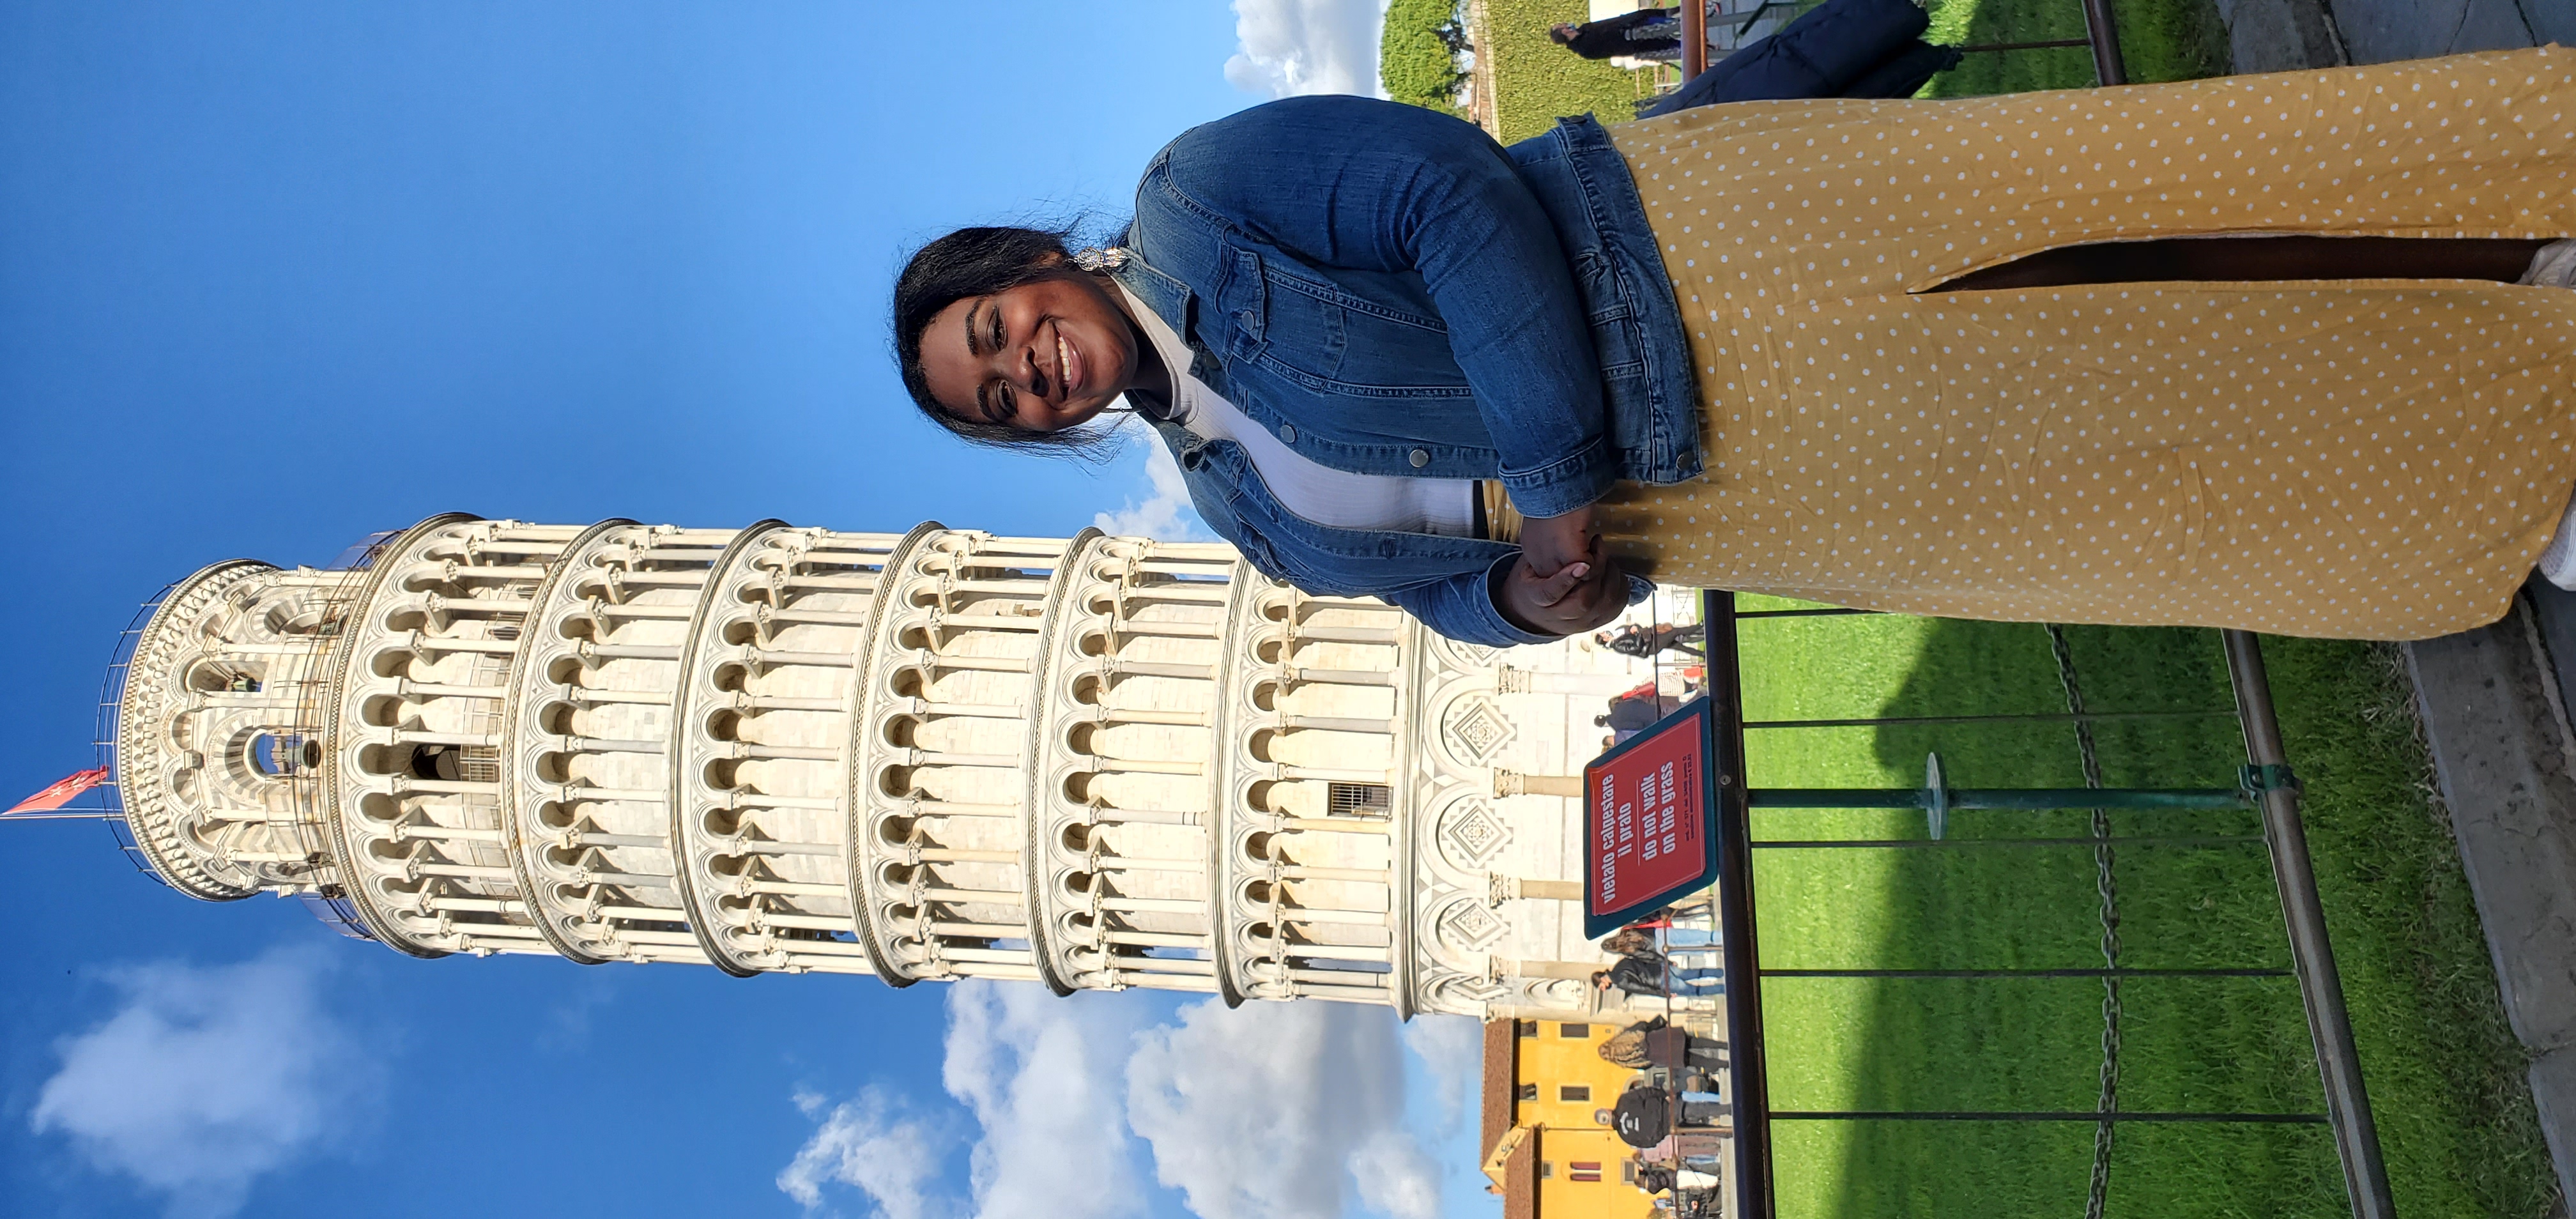 This was taken in Pisa, Italy! It was my last trip while studying abroad in Italy!